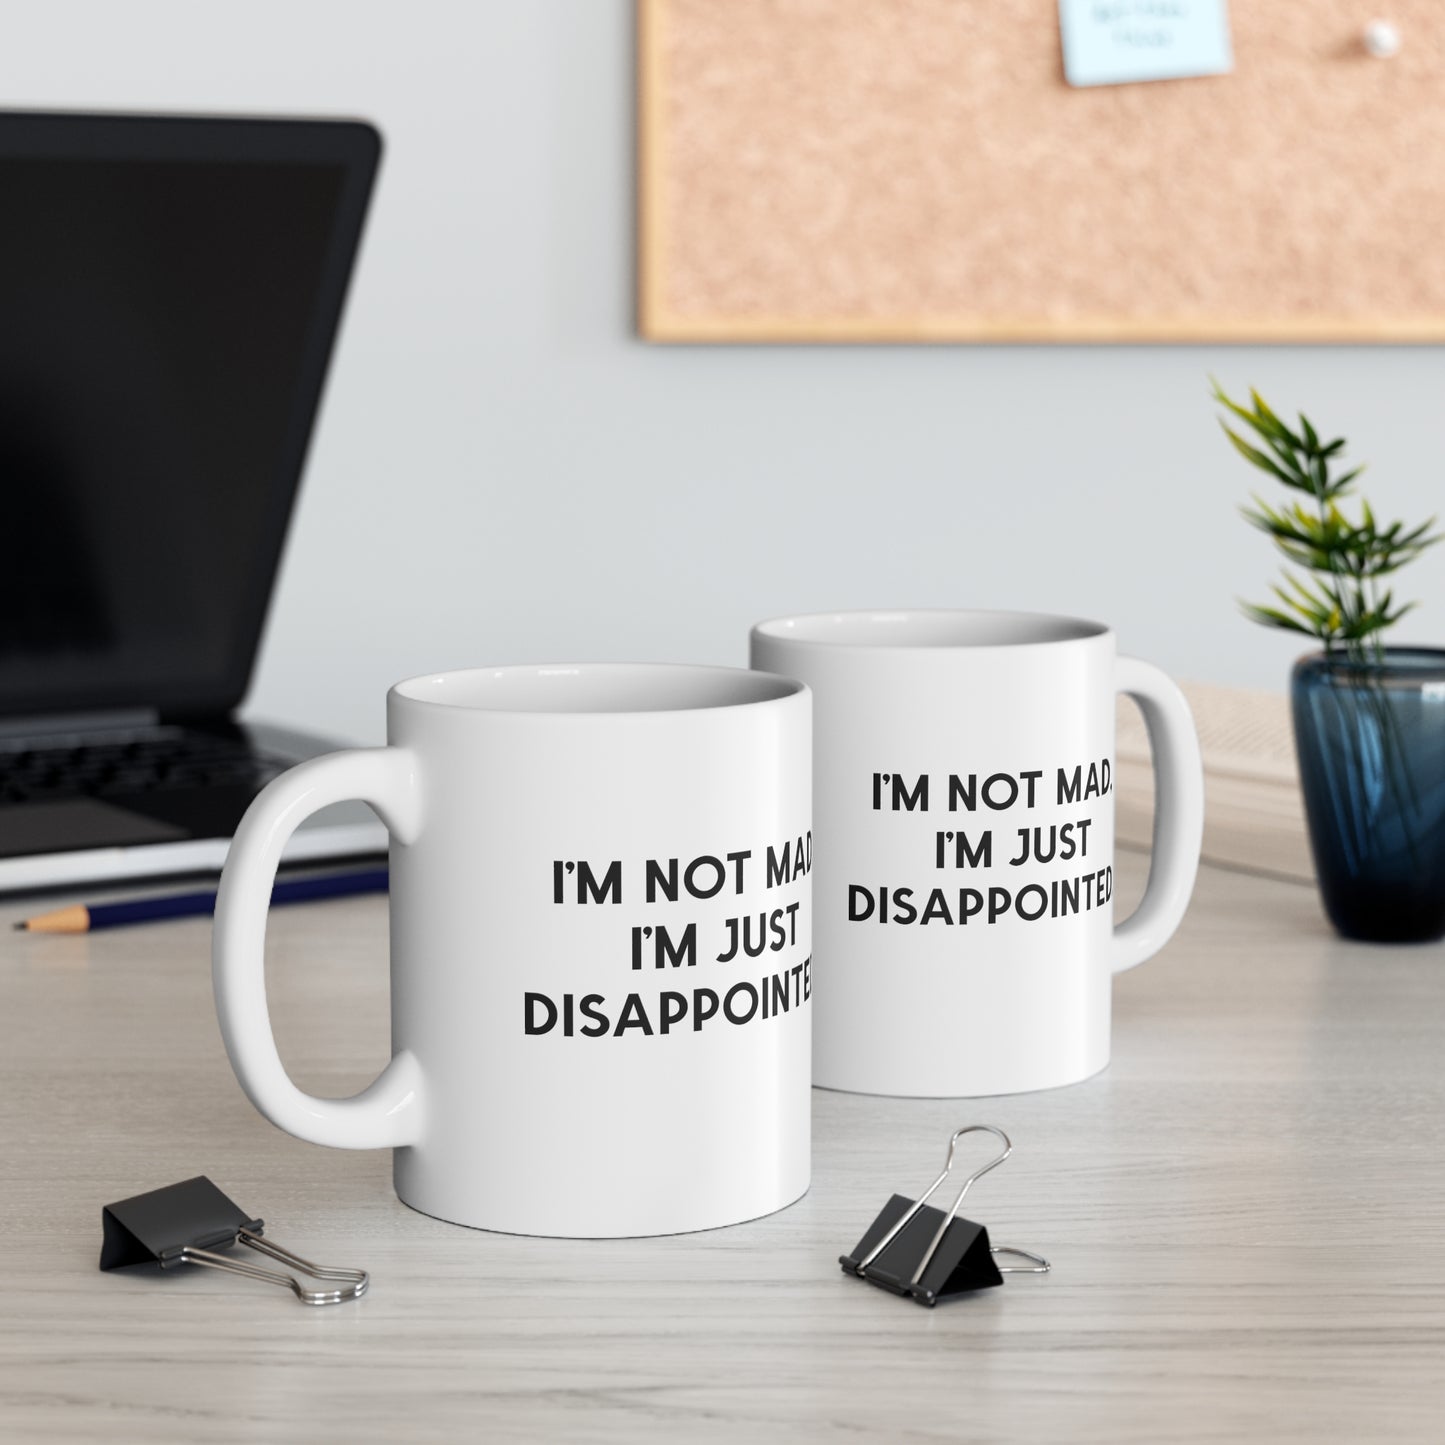 I'm Not Mad, I'm Just Disappointed Mug